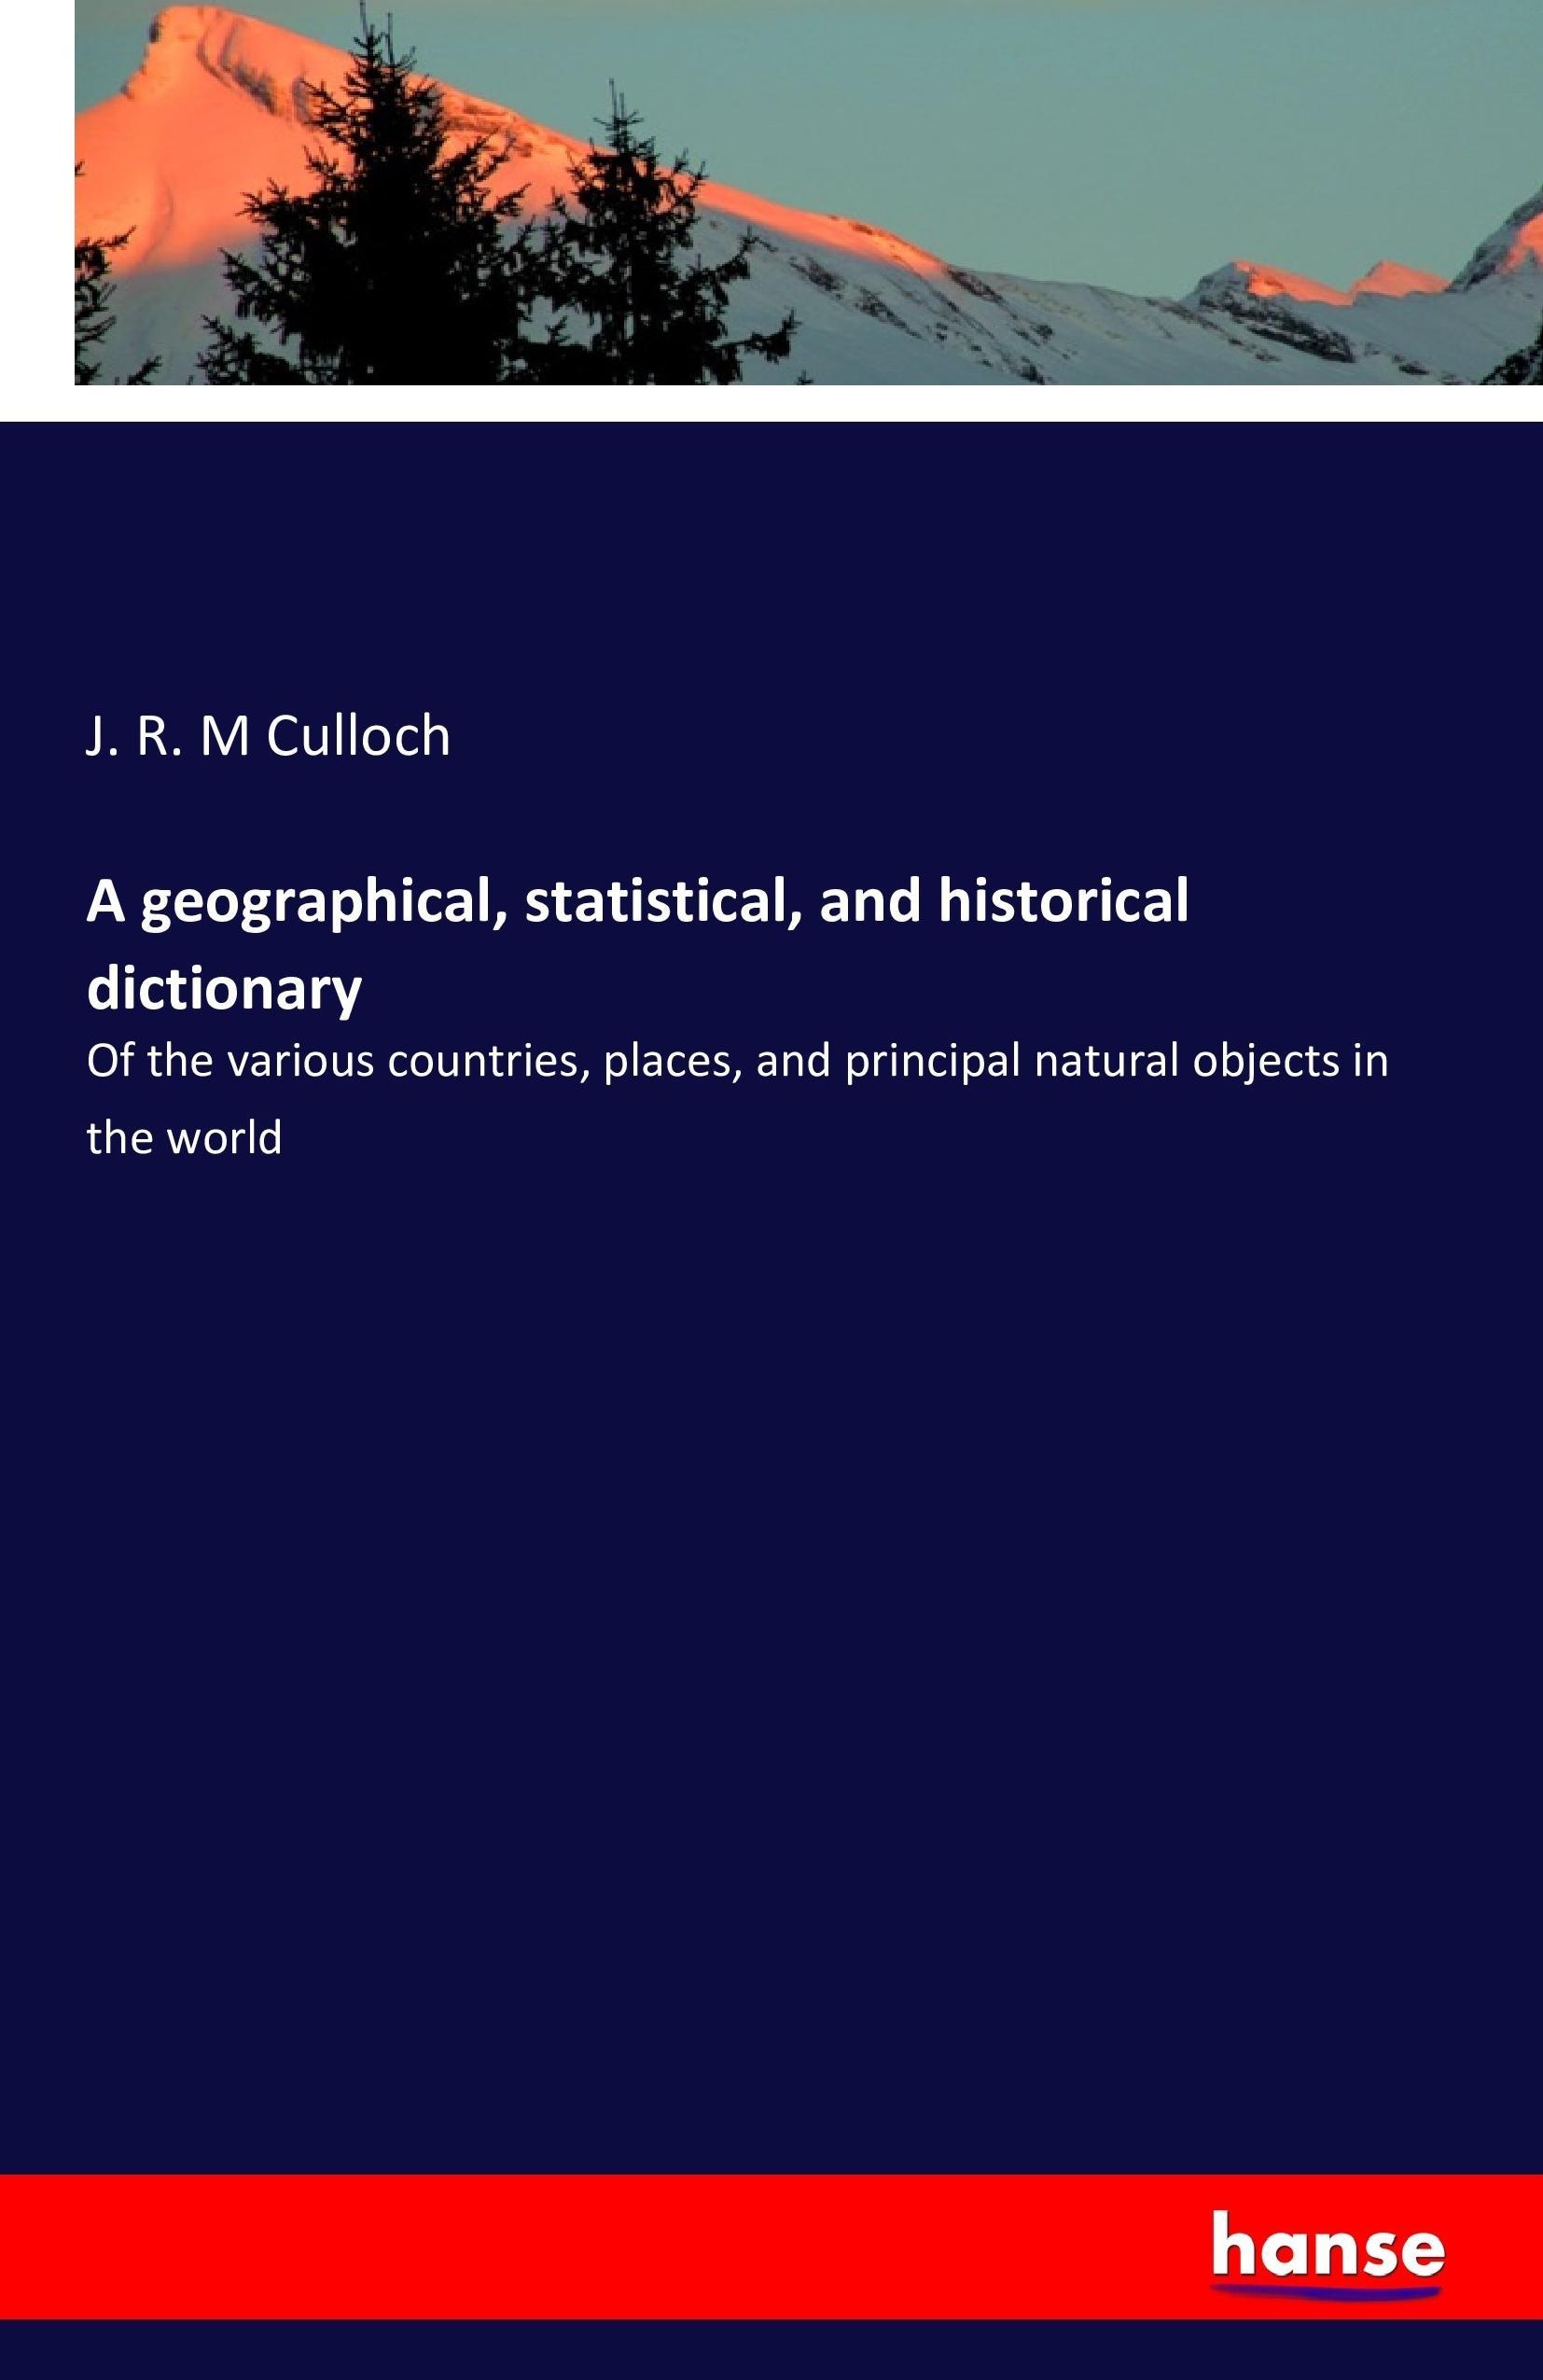 A Dictionary Geographical, Statistical, and Historical - M Culloch, J. R.